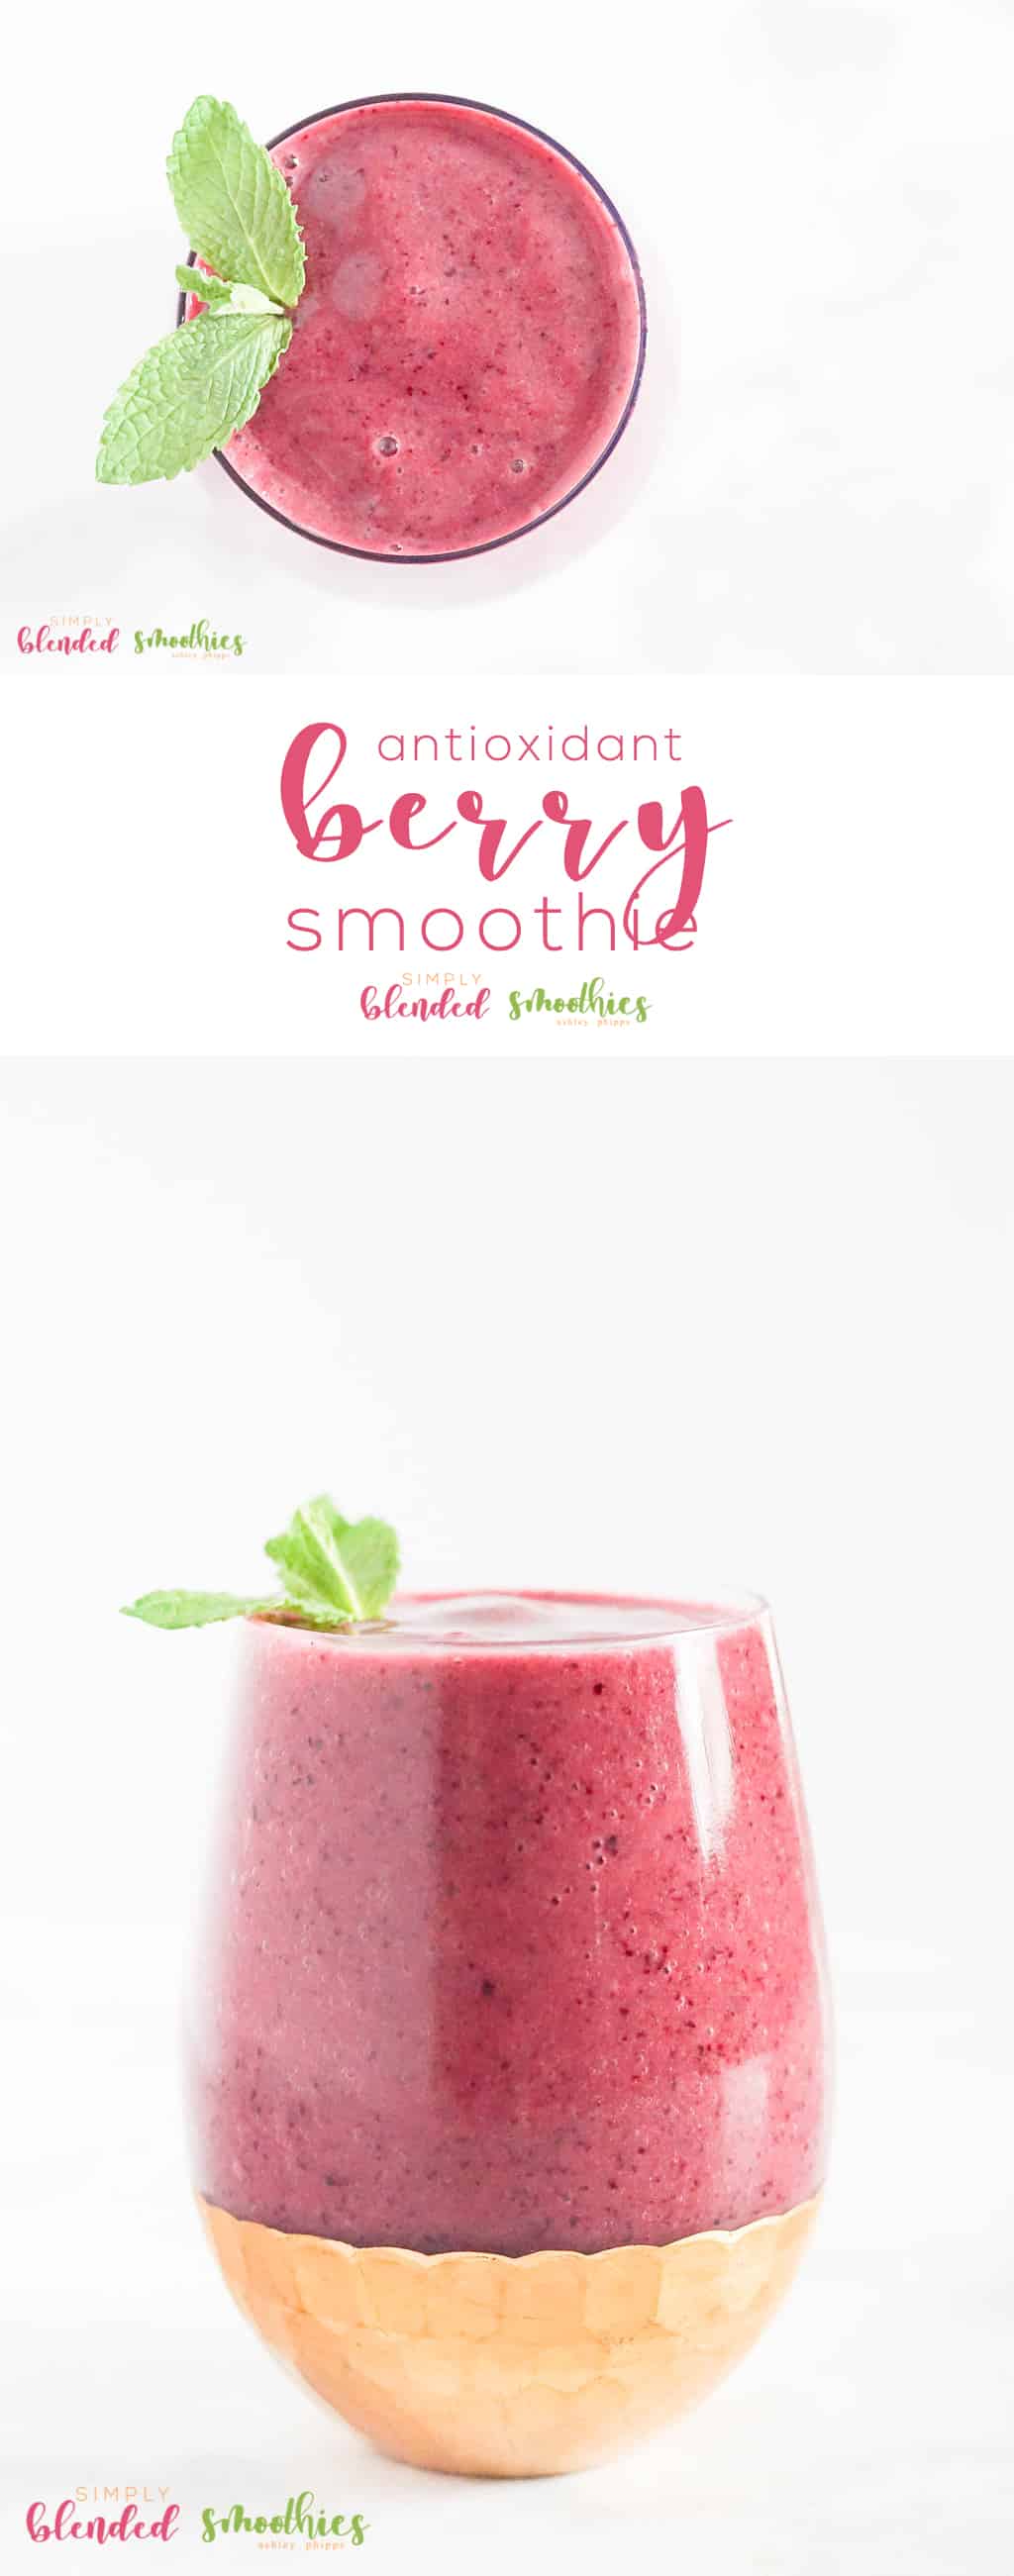 Antioxidant Berry Smoothie Recipe - a delicious mix of cherries, blueberries and pomegranate juice makes this smoothie super healthy and really delicious